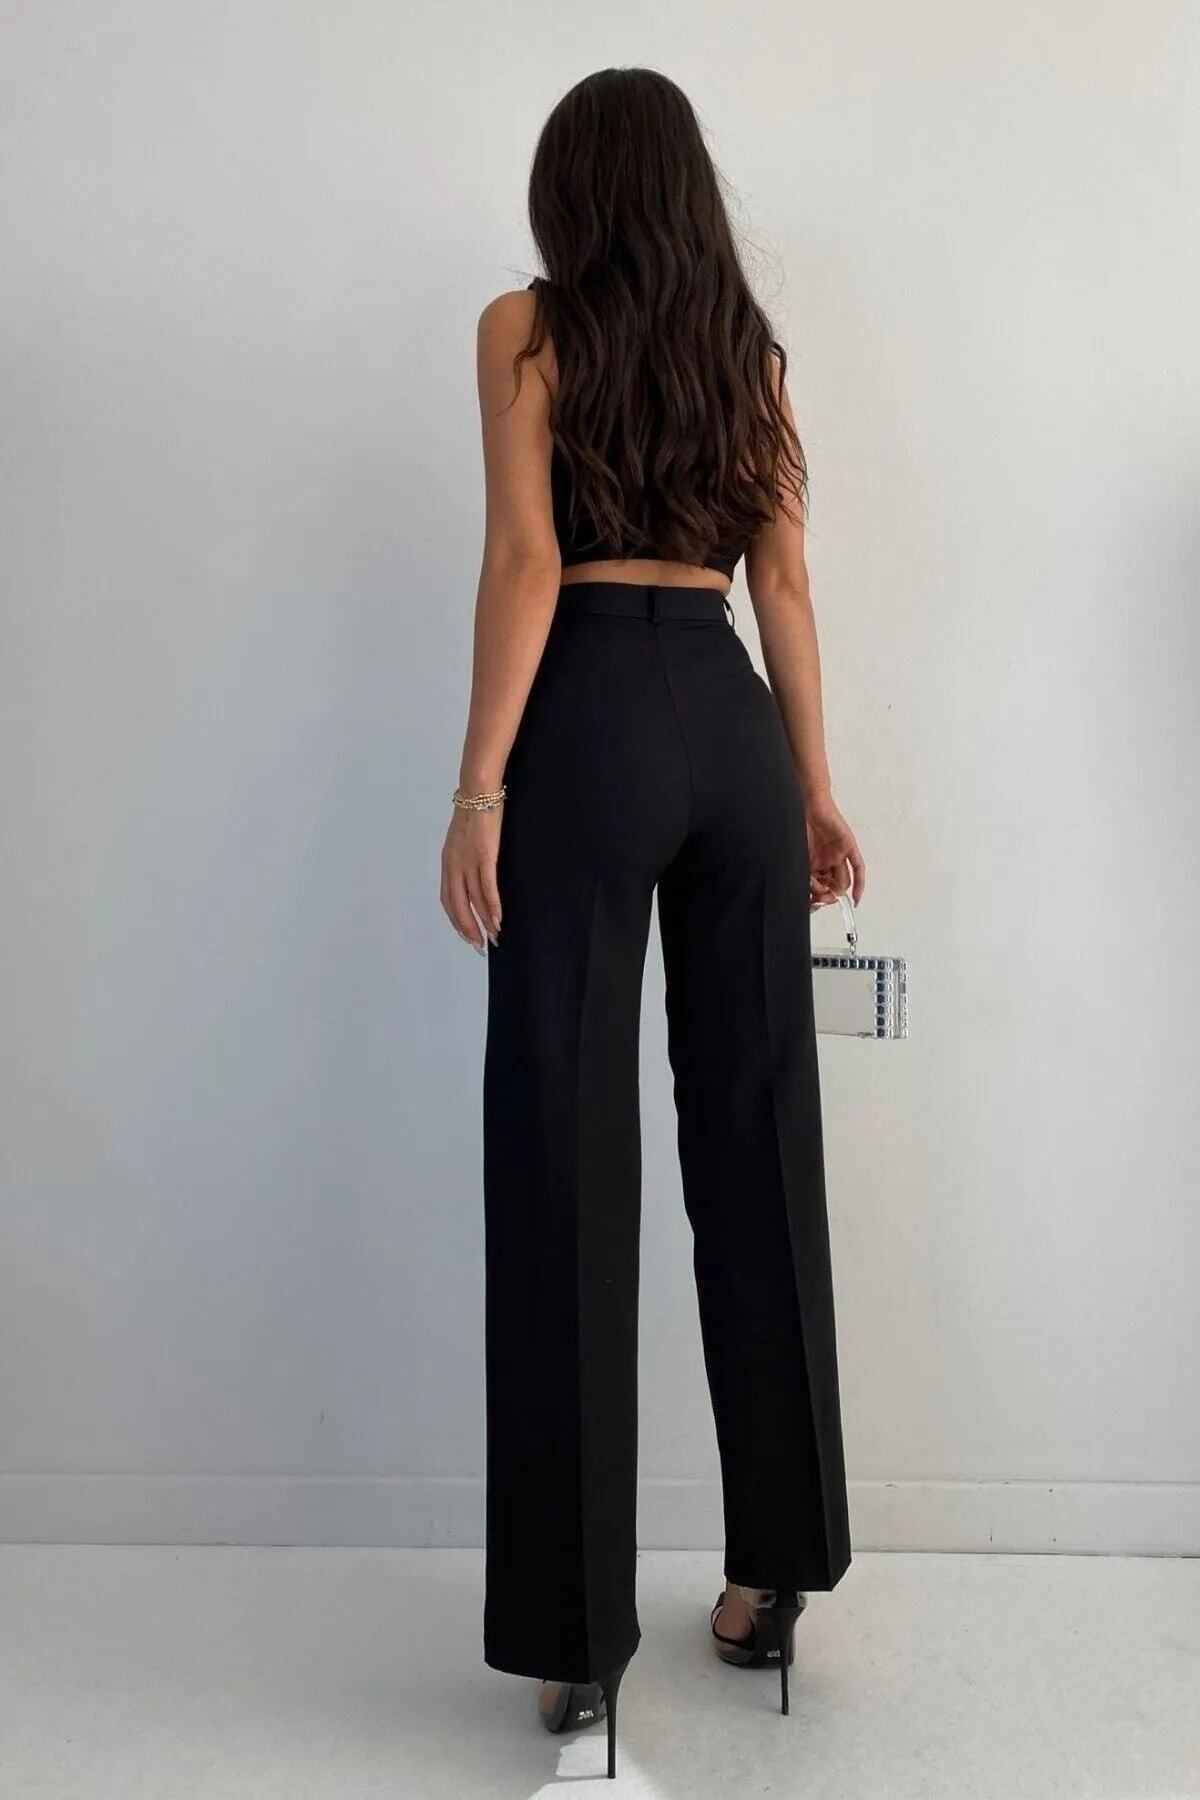 Autumn Palazzo High Waisted Palazzo Pants With Top For Women With